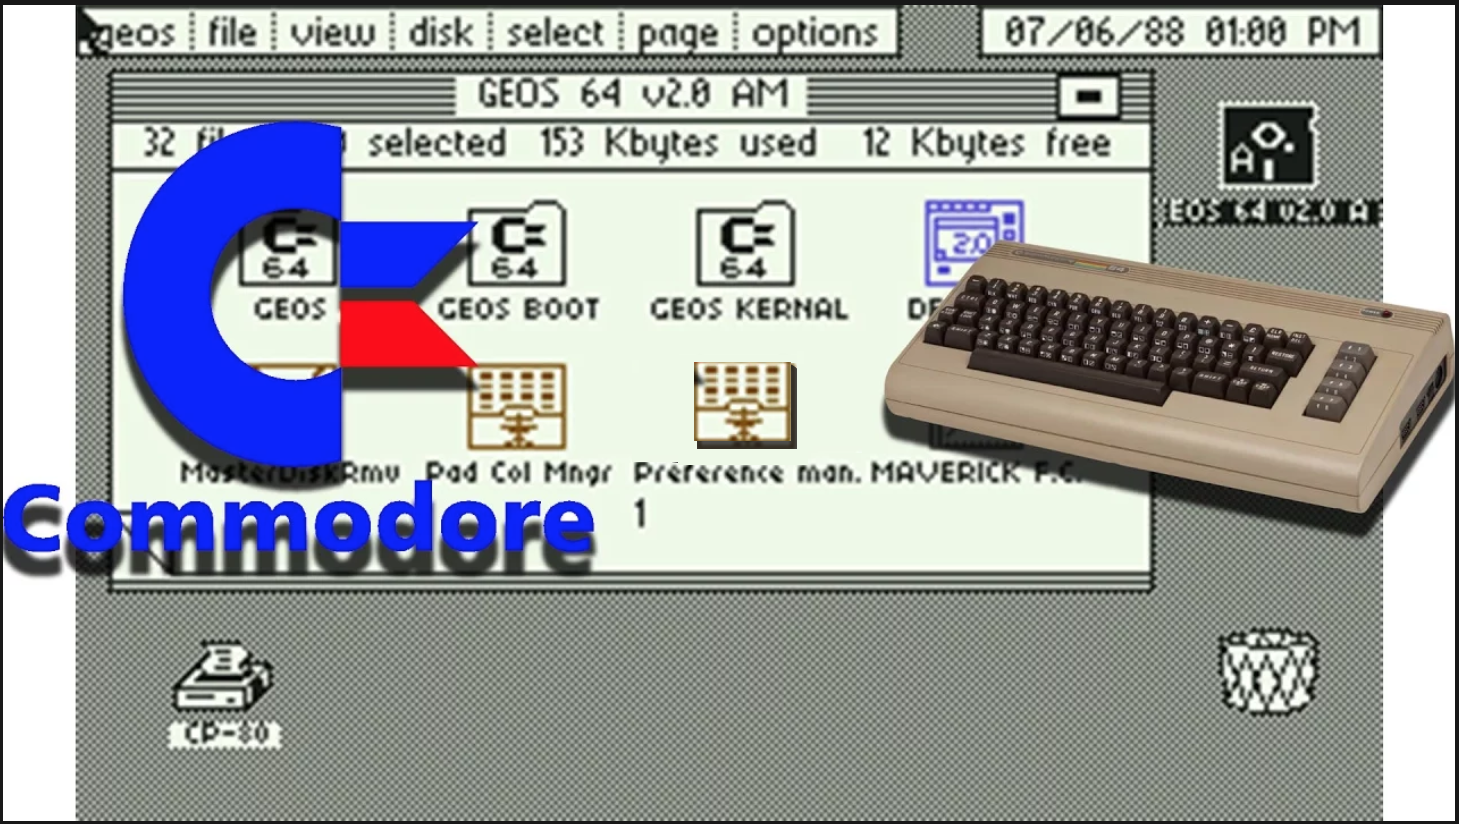 GEOS OS for commodore 64